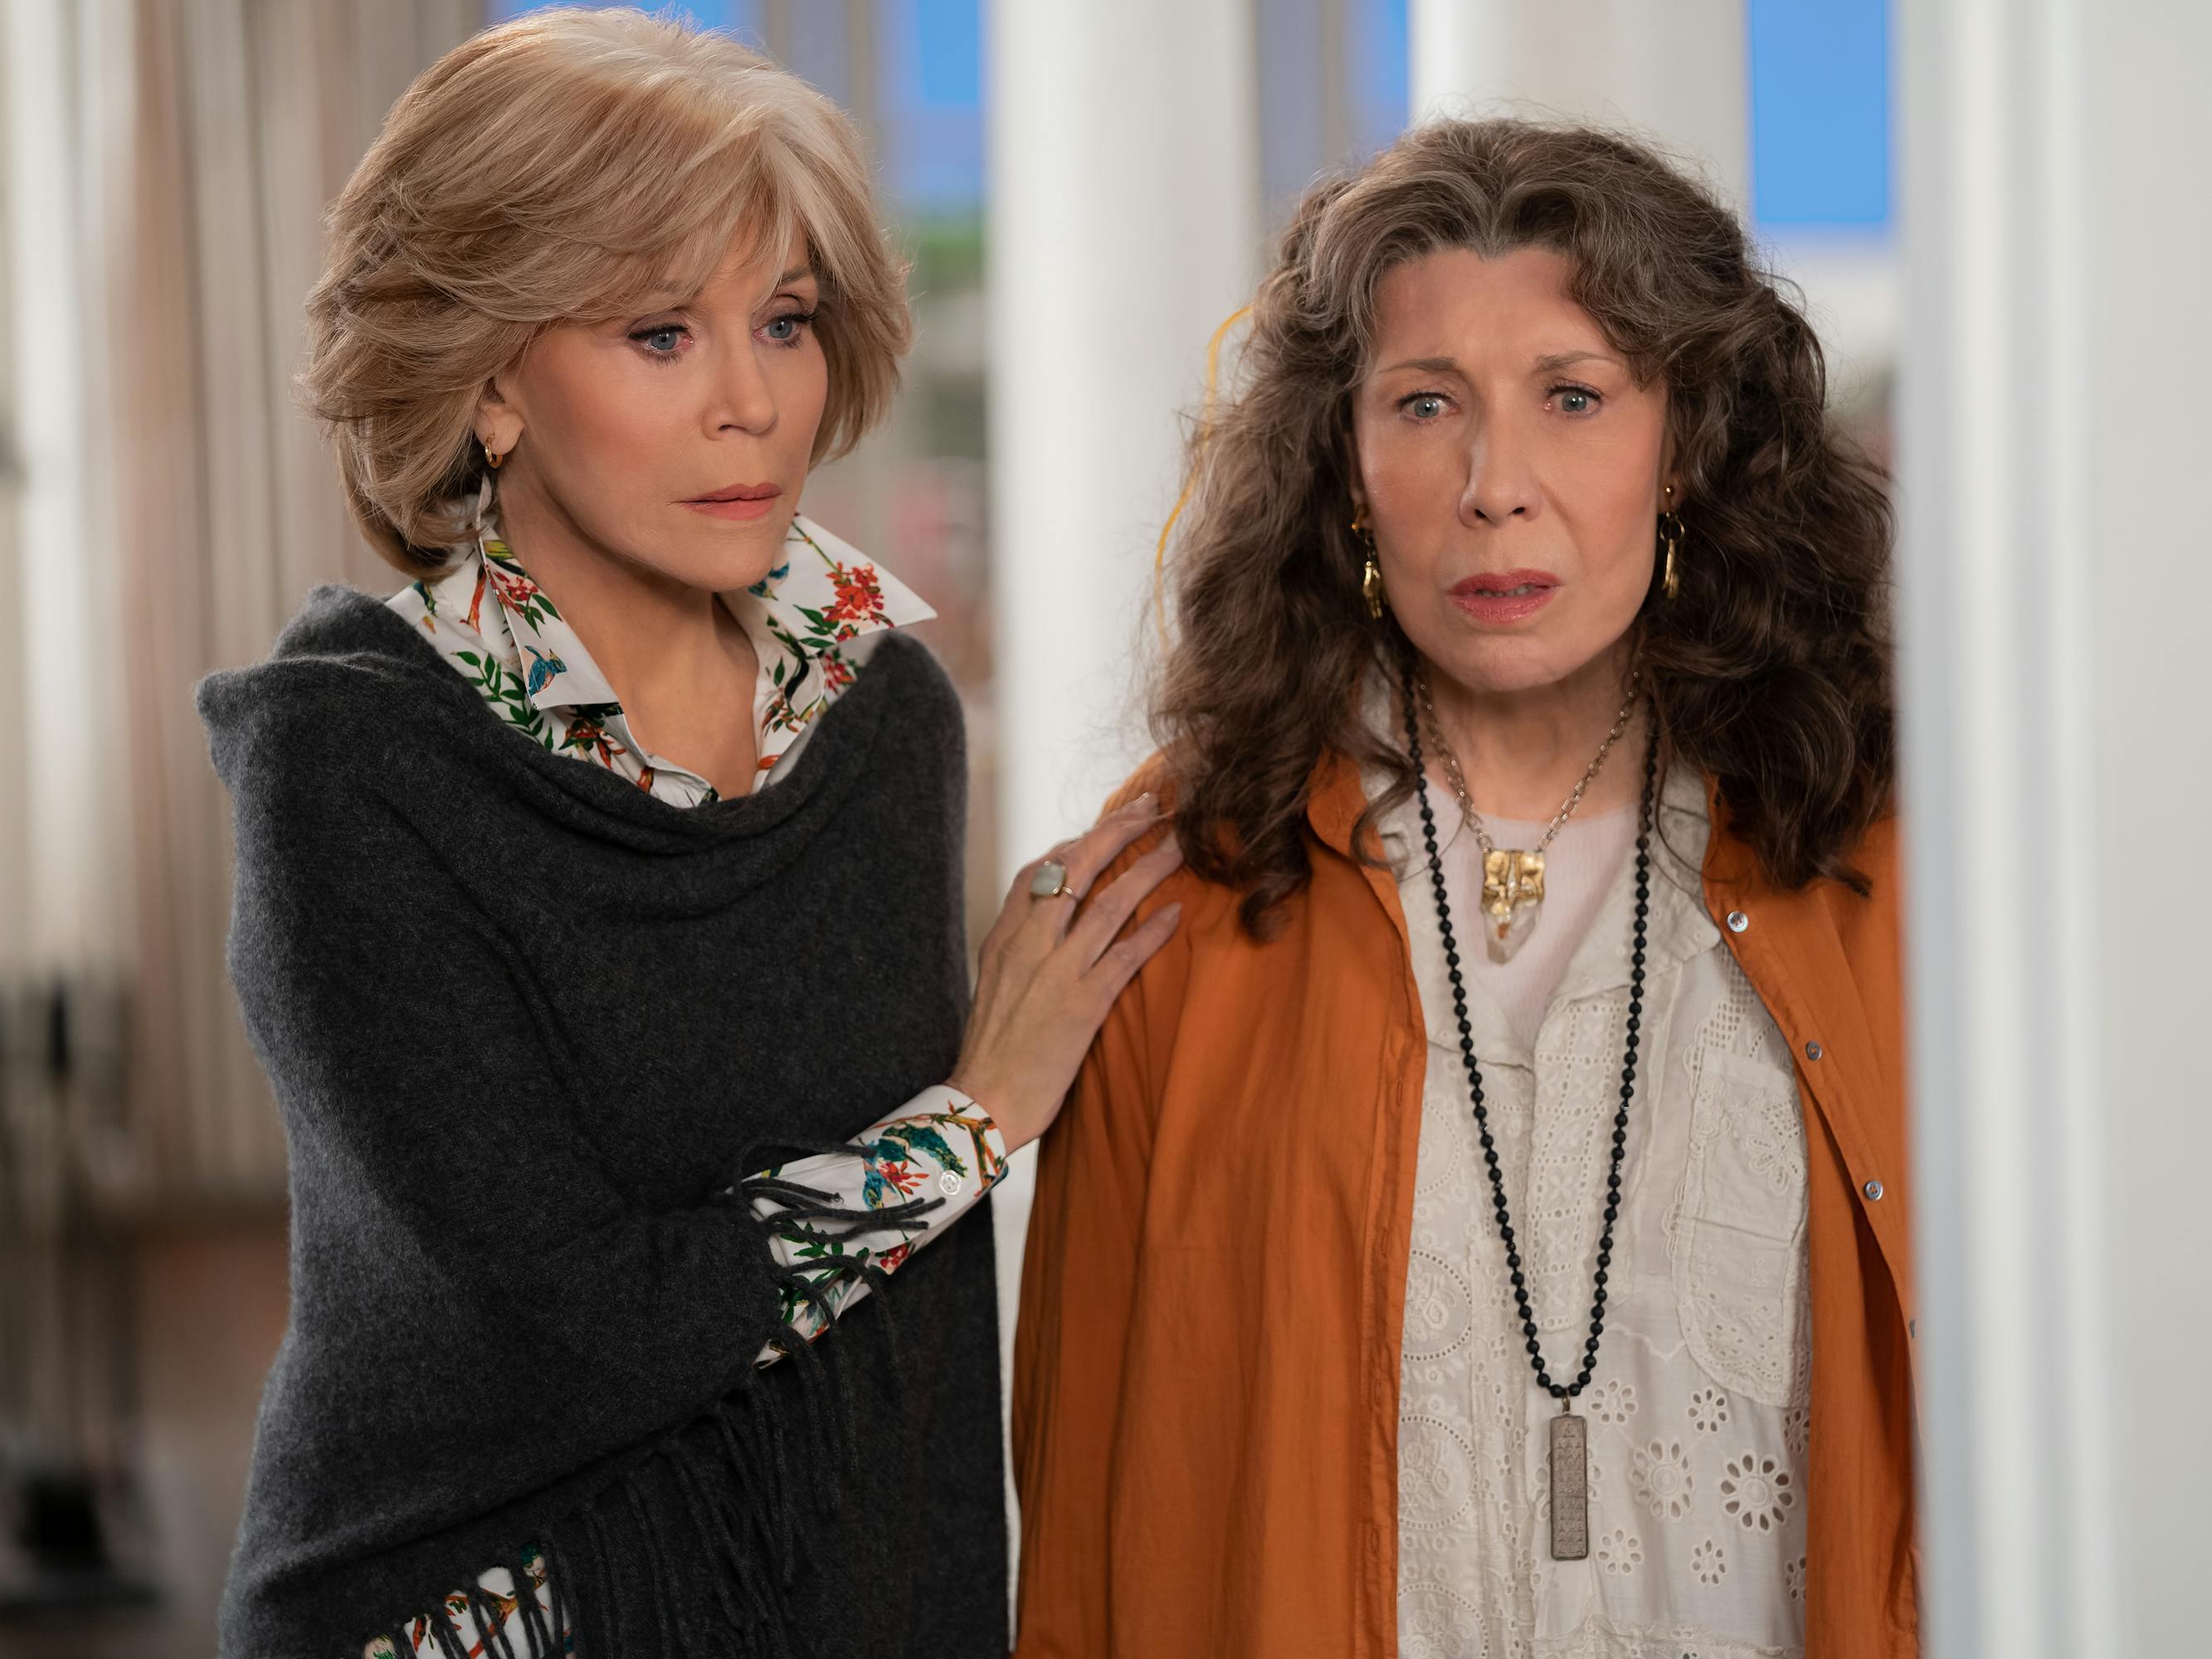 Jane Fonda and Lily Tomlin look alarmed and stand by a door frame. Fonda wears a black sweater and pattered shirt beneath, Tomlin wears an orange cardigan.